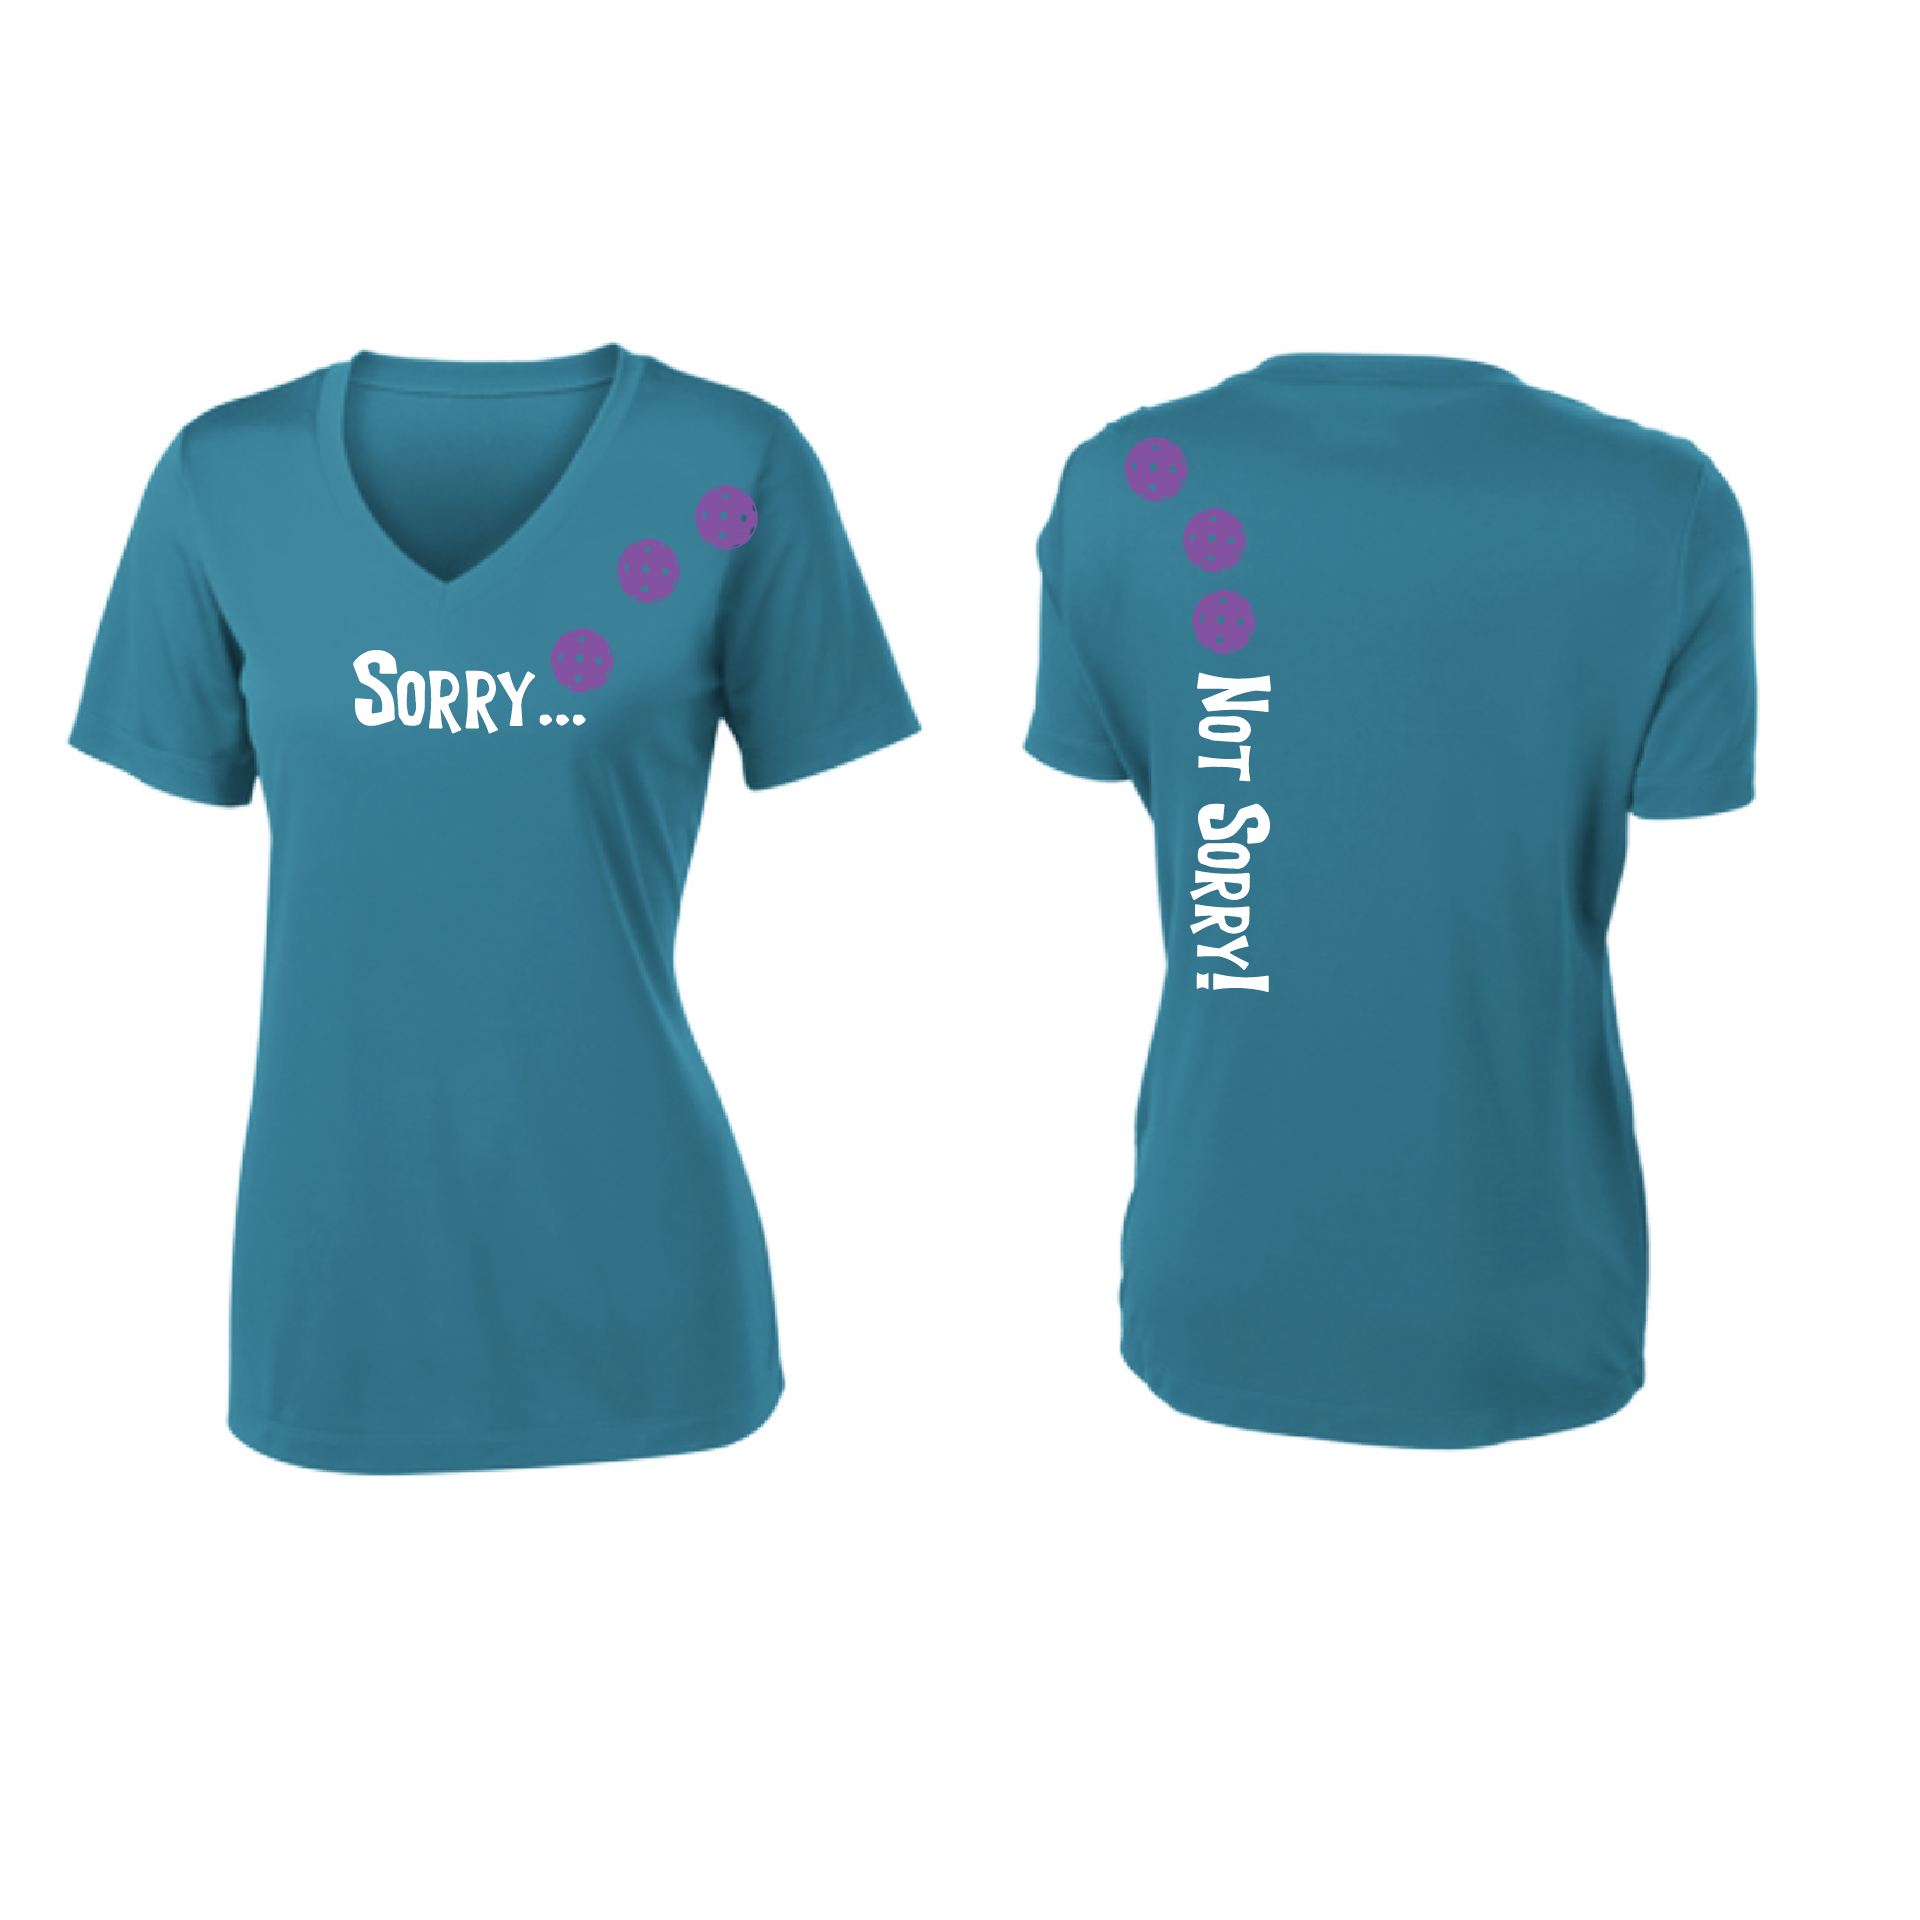 Pickleball Design: Sorry...Not Sorry with Customizable Ball Color - Choose: Orange, Green or Purple.   Women's Styles: Short-Sleeve V-Neck Turn up the volume in this Women's shirt with its perfect mix of softness and attitude. Material is ultra-comfortable with moisture wicking properties and tri-blend softness. PosiCharge technology locks in color. Highly breathable and lightweight.